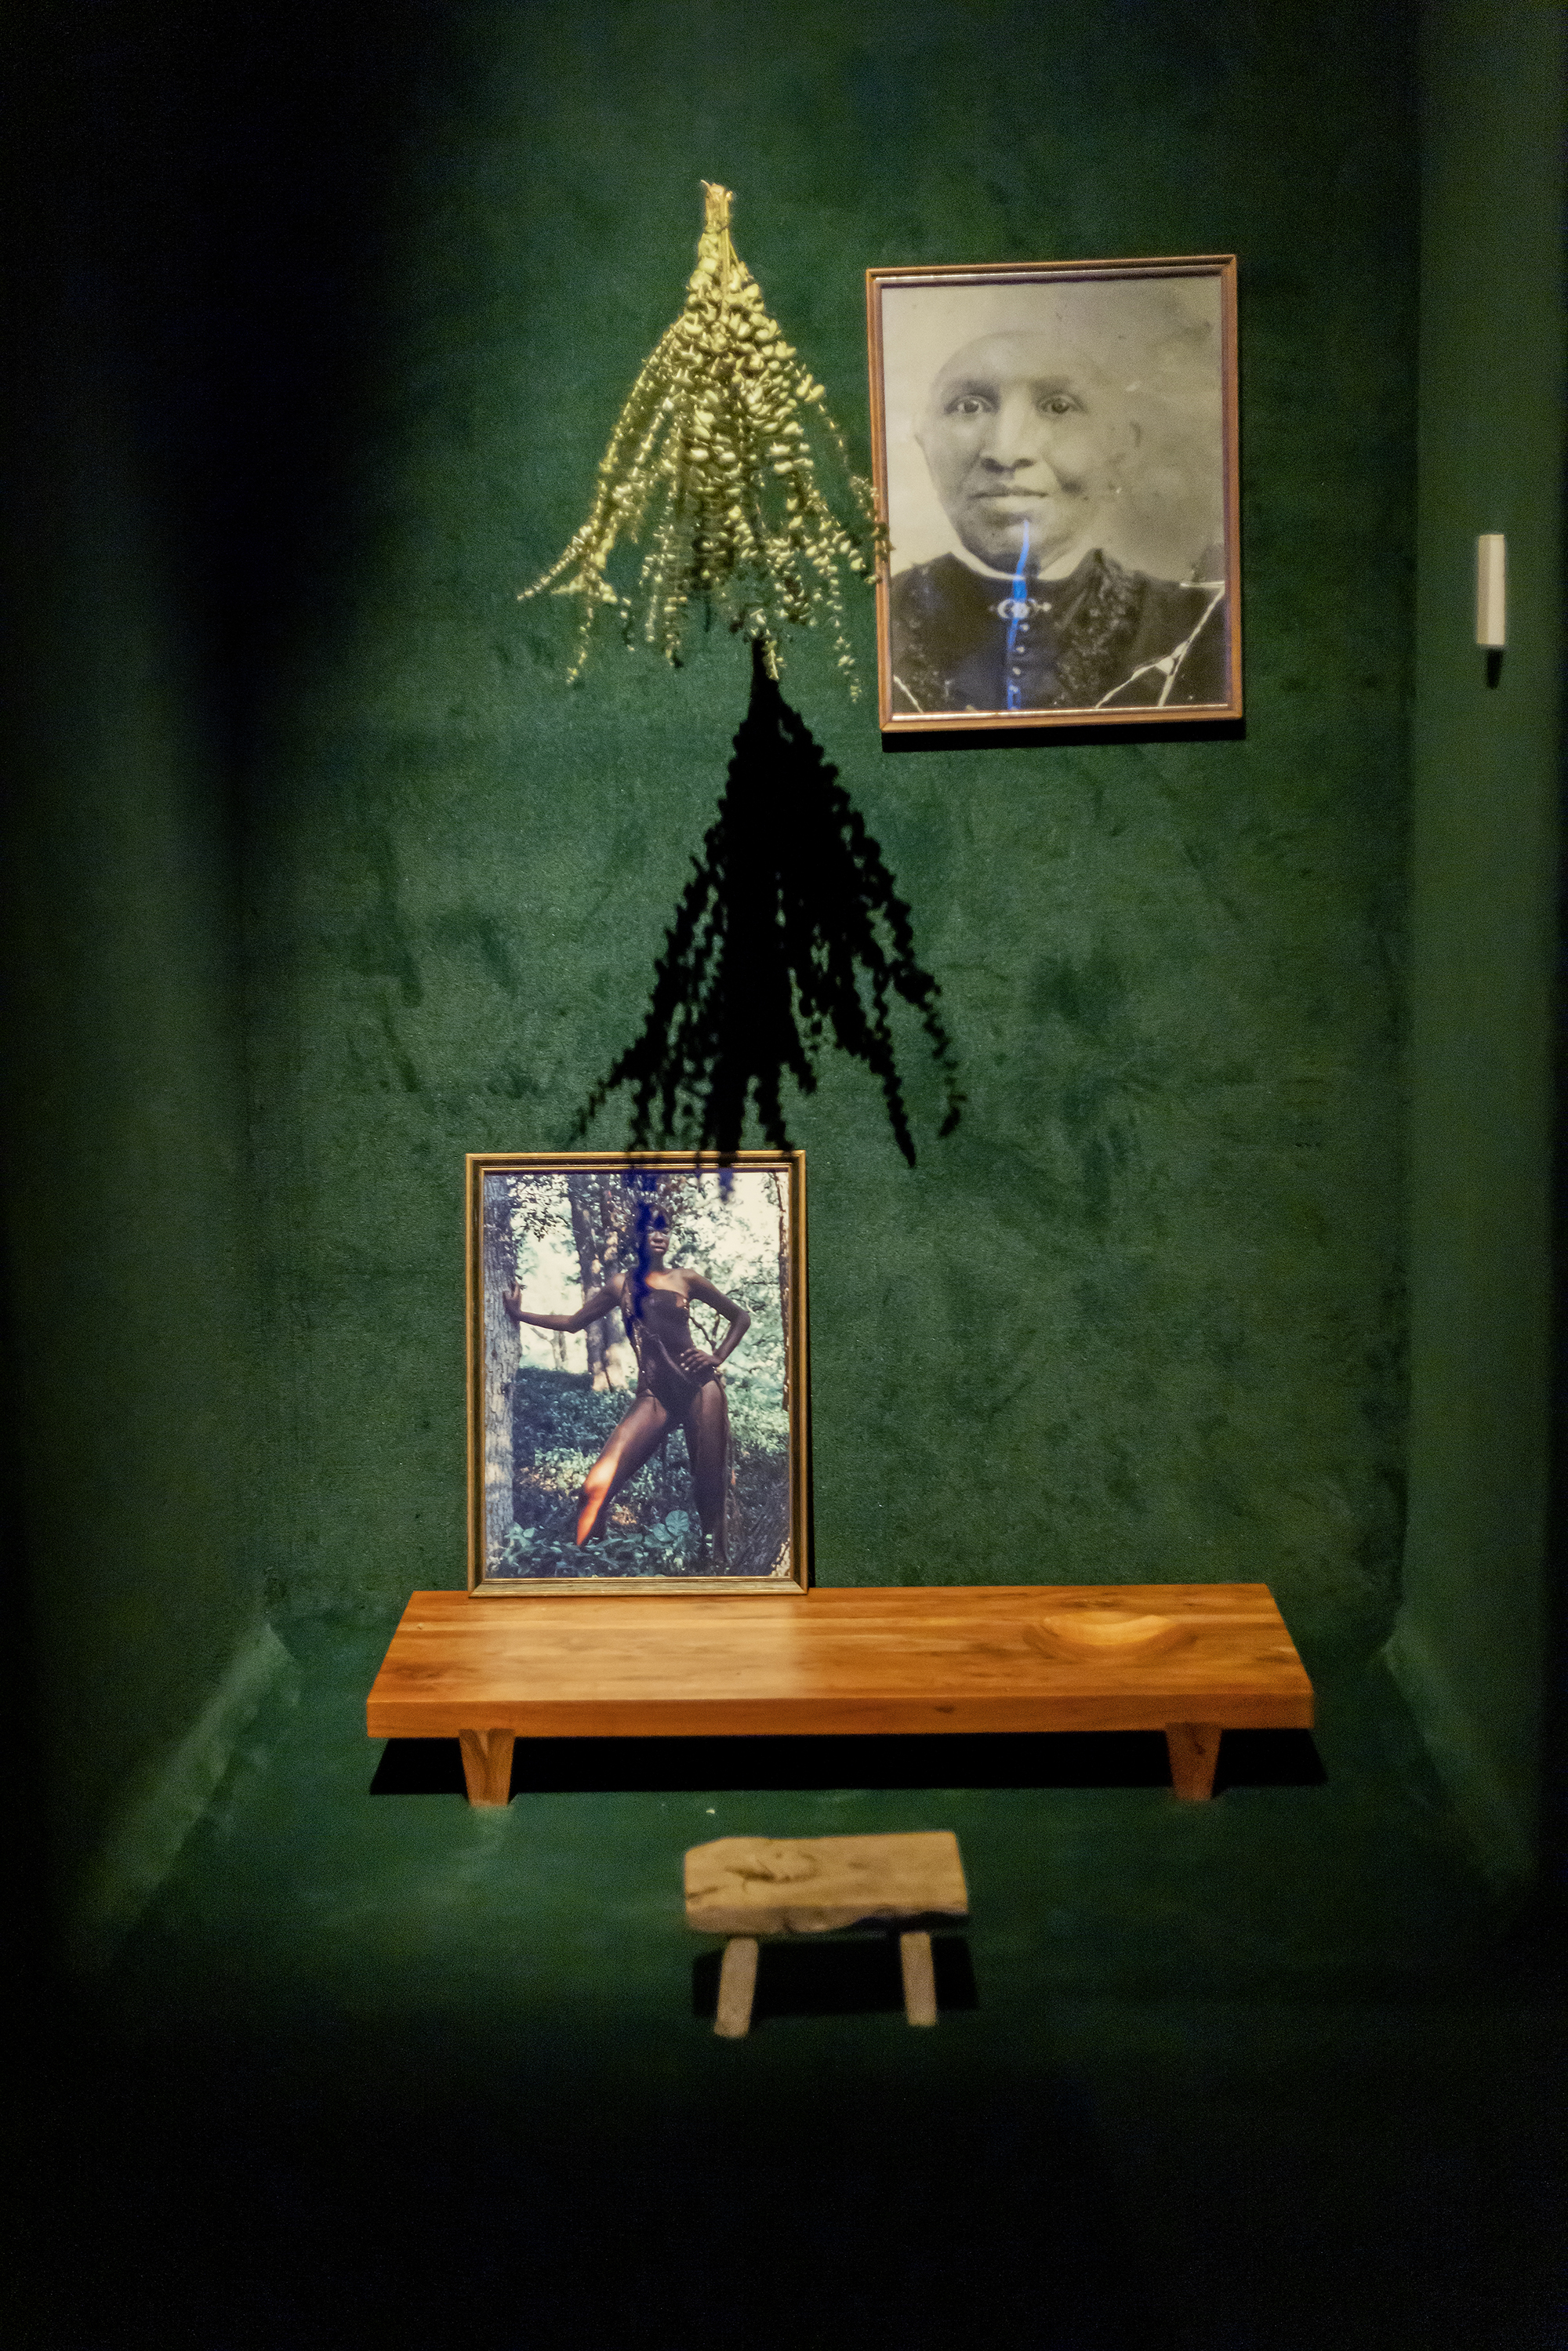 Two framed photographs placed against a velvet backdrop, complemented by foliage and a wood desk.